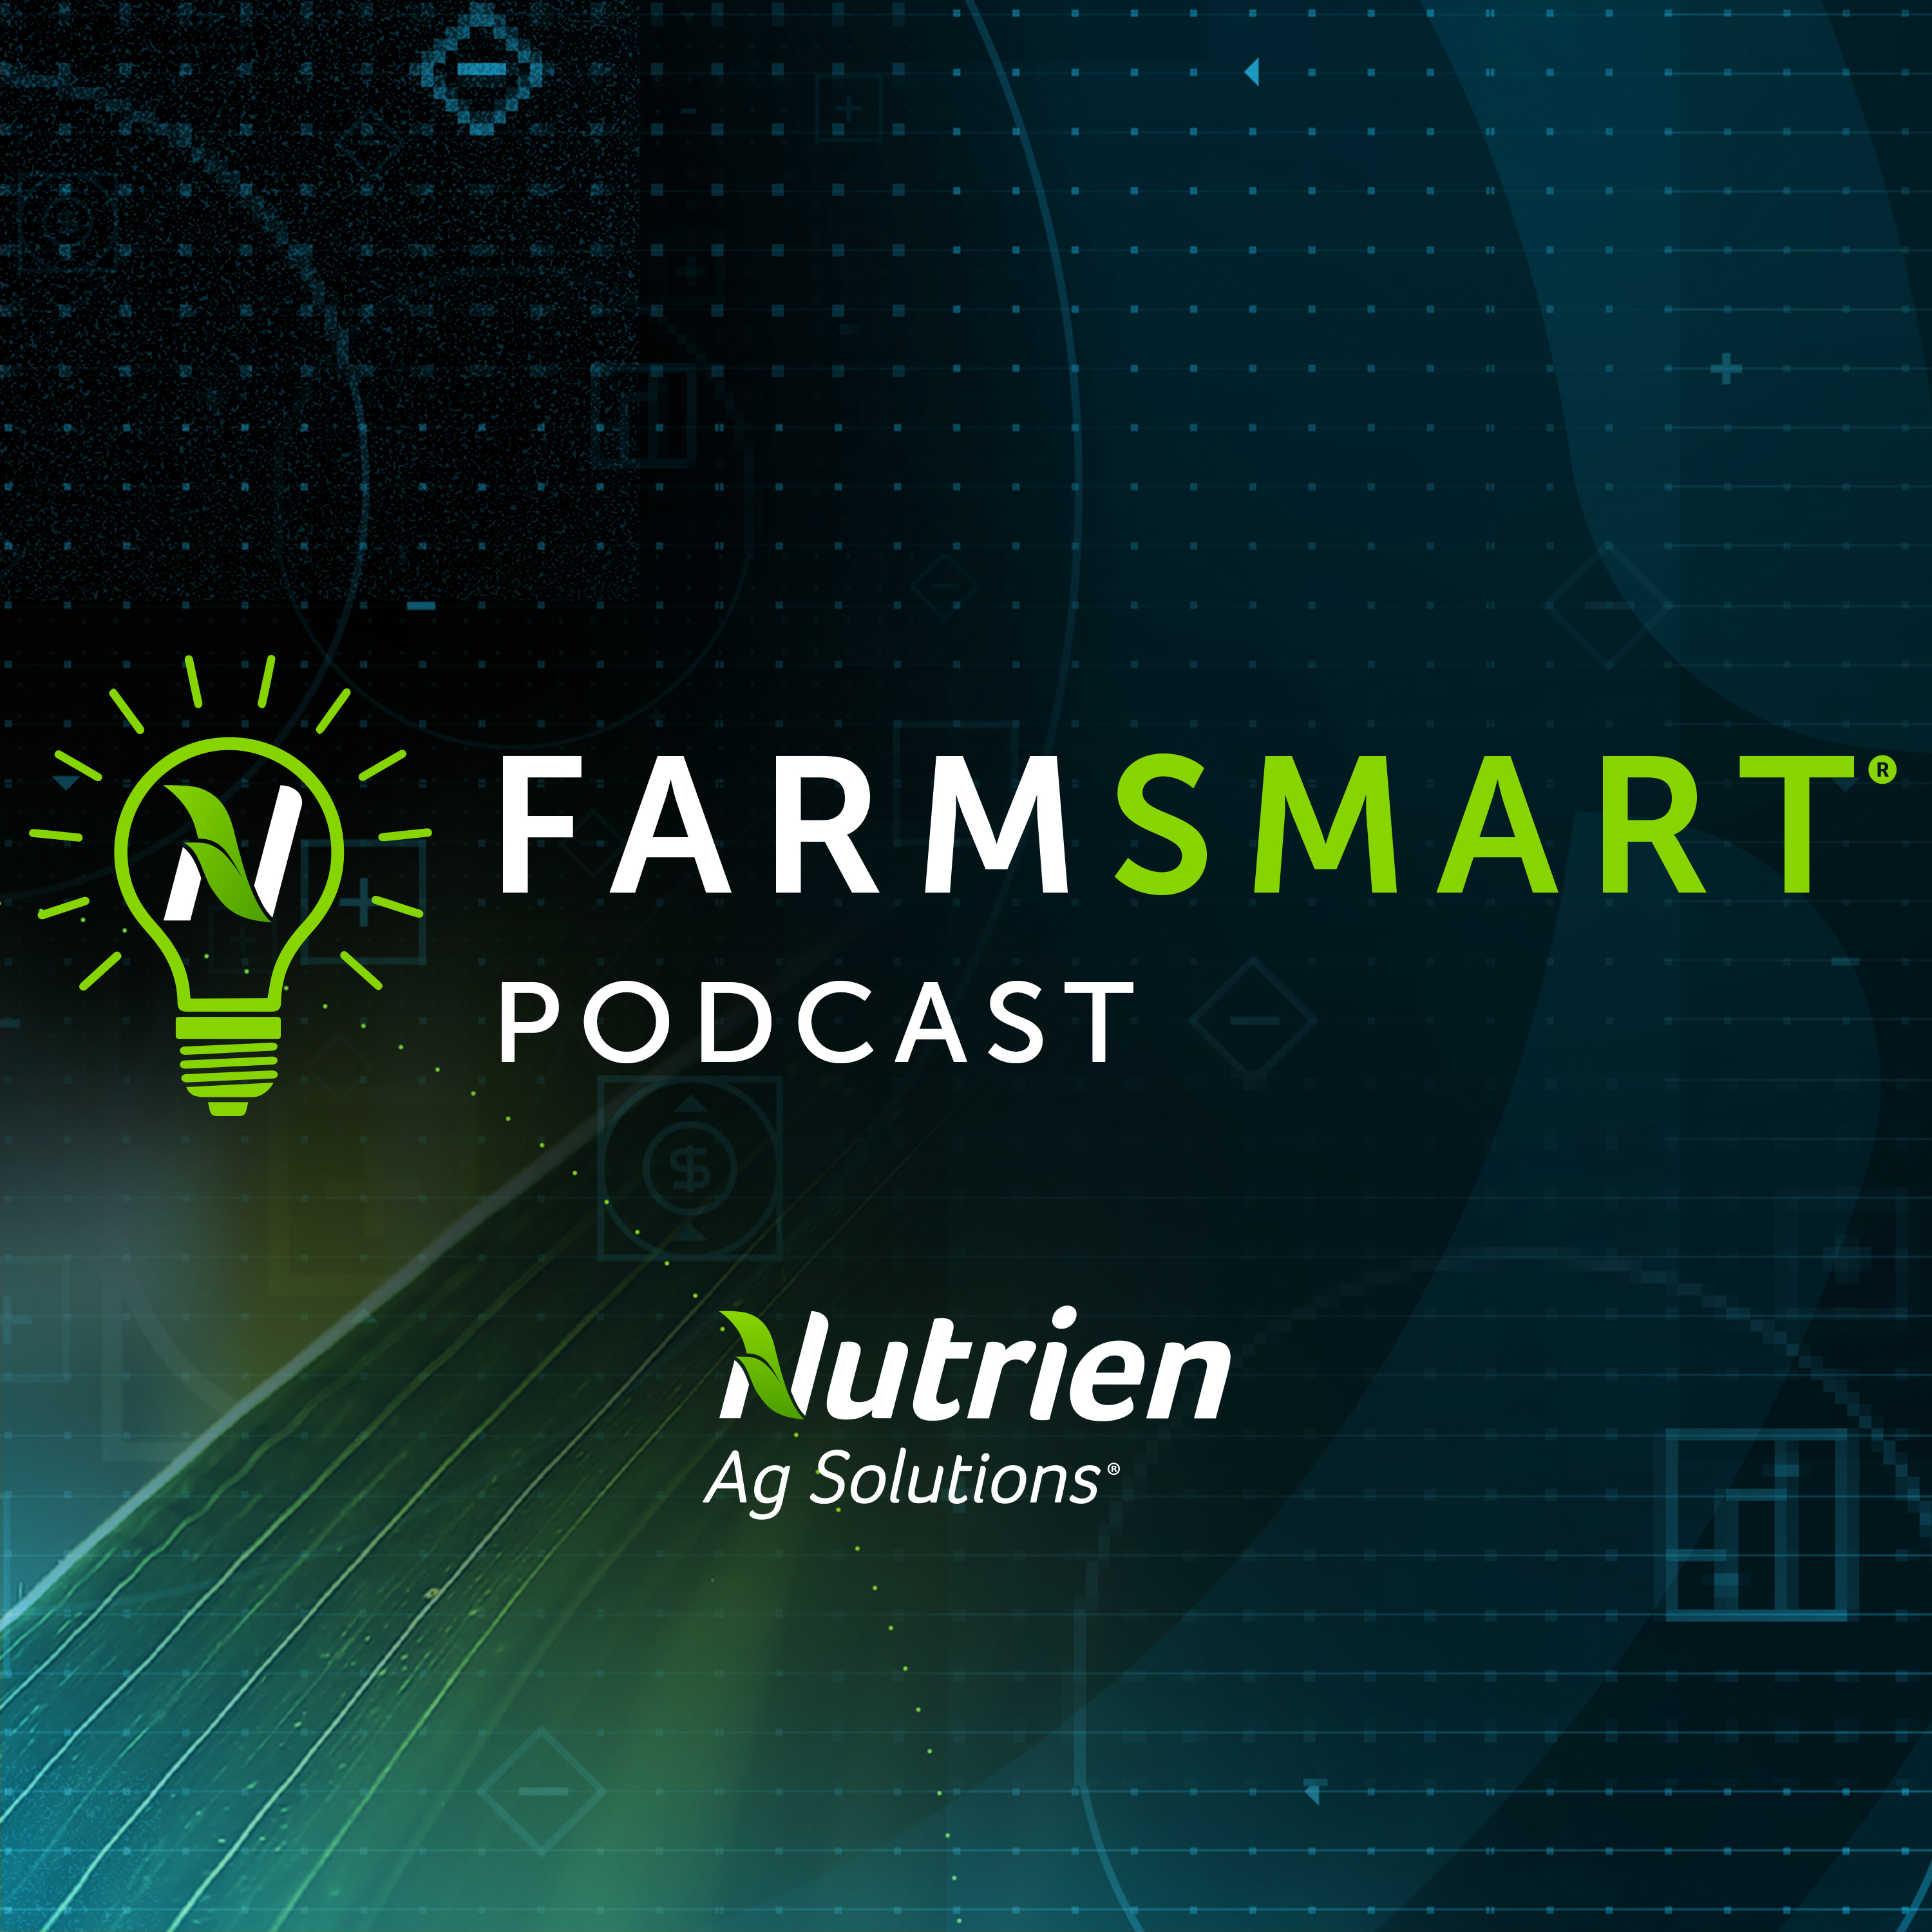 The FARMSMART Podcast, presented by Nutrien Ag Solutions